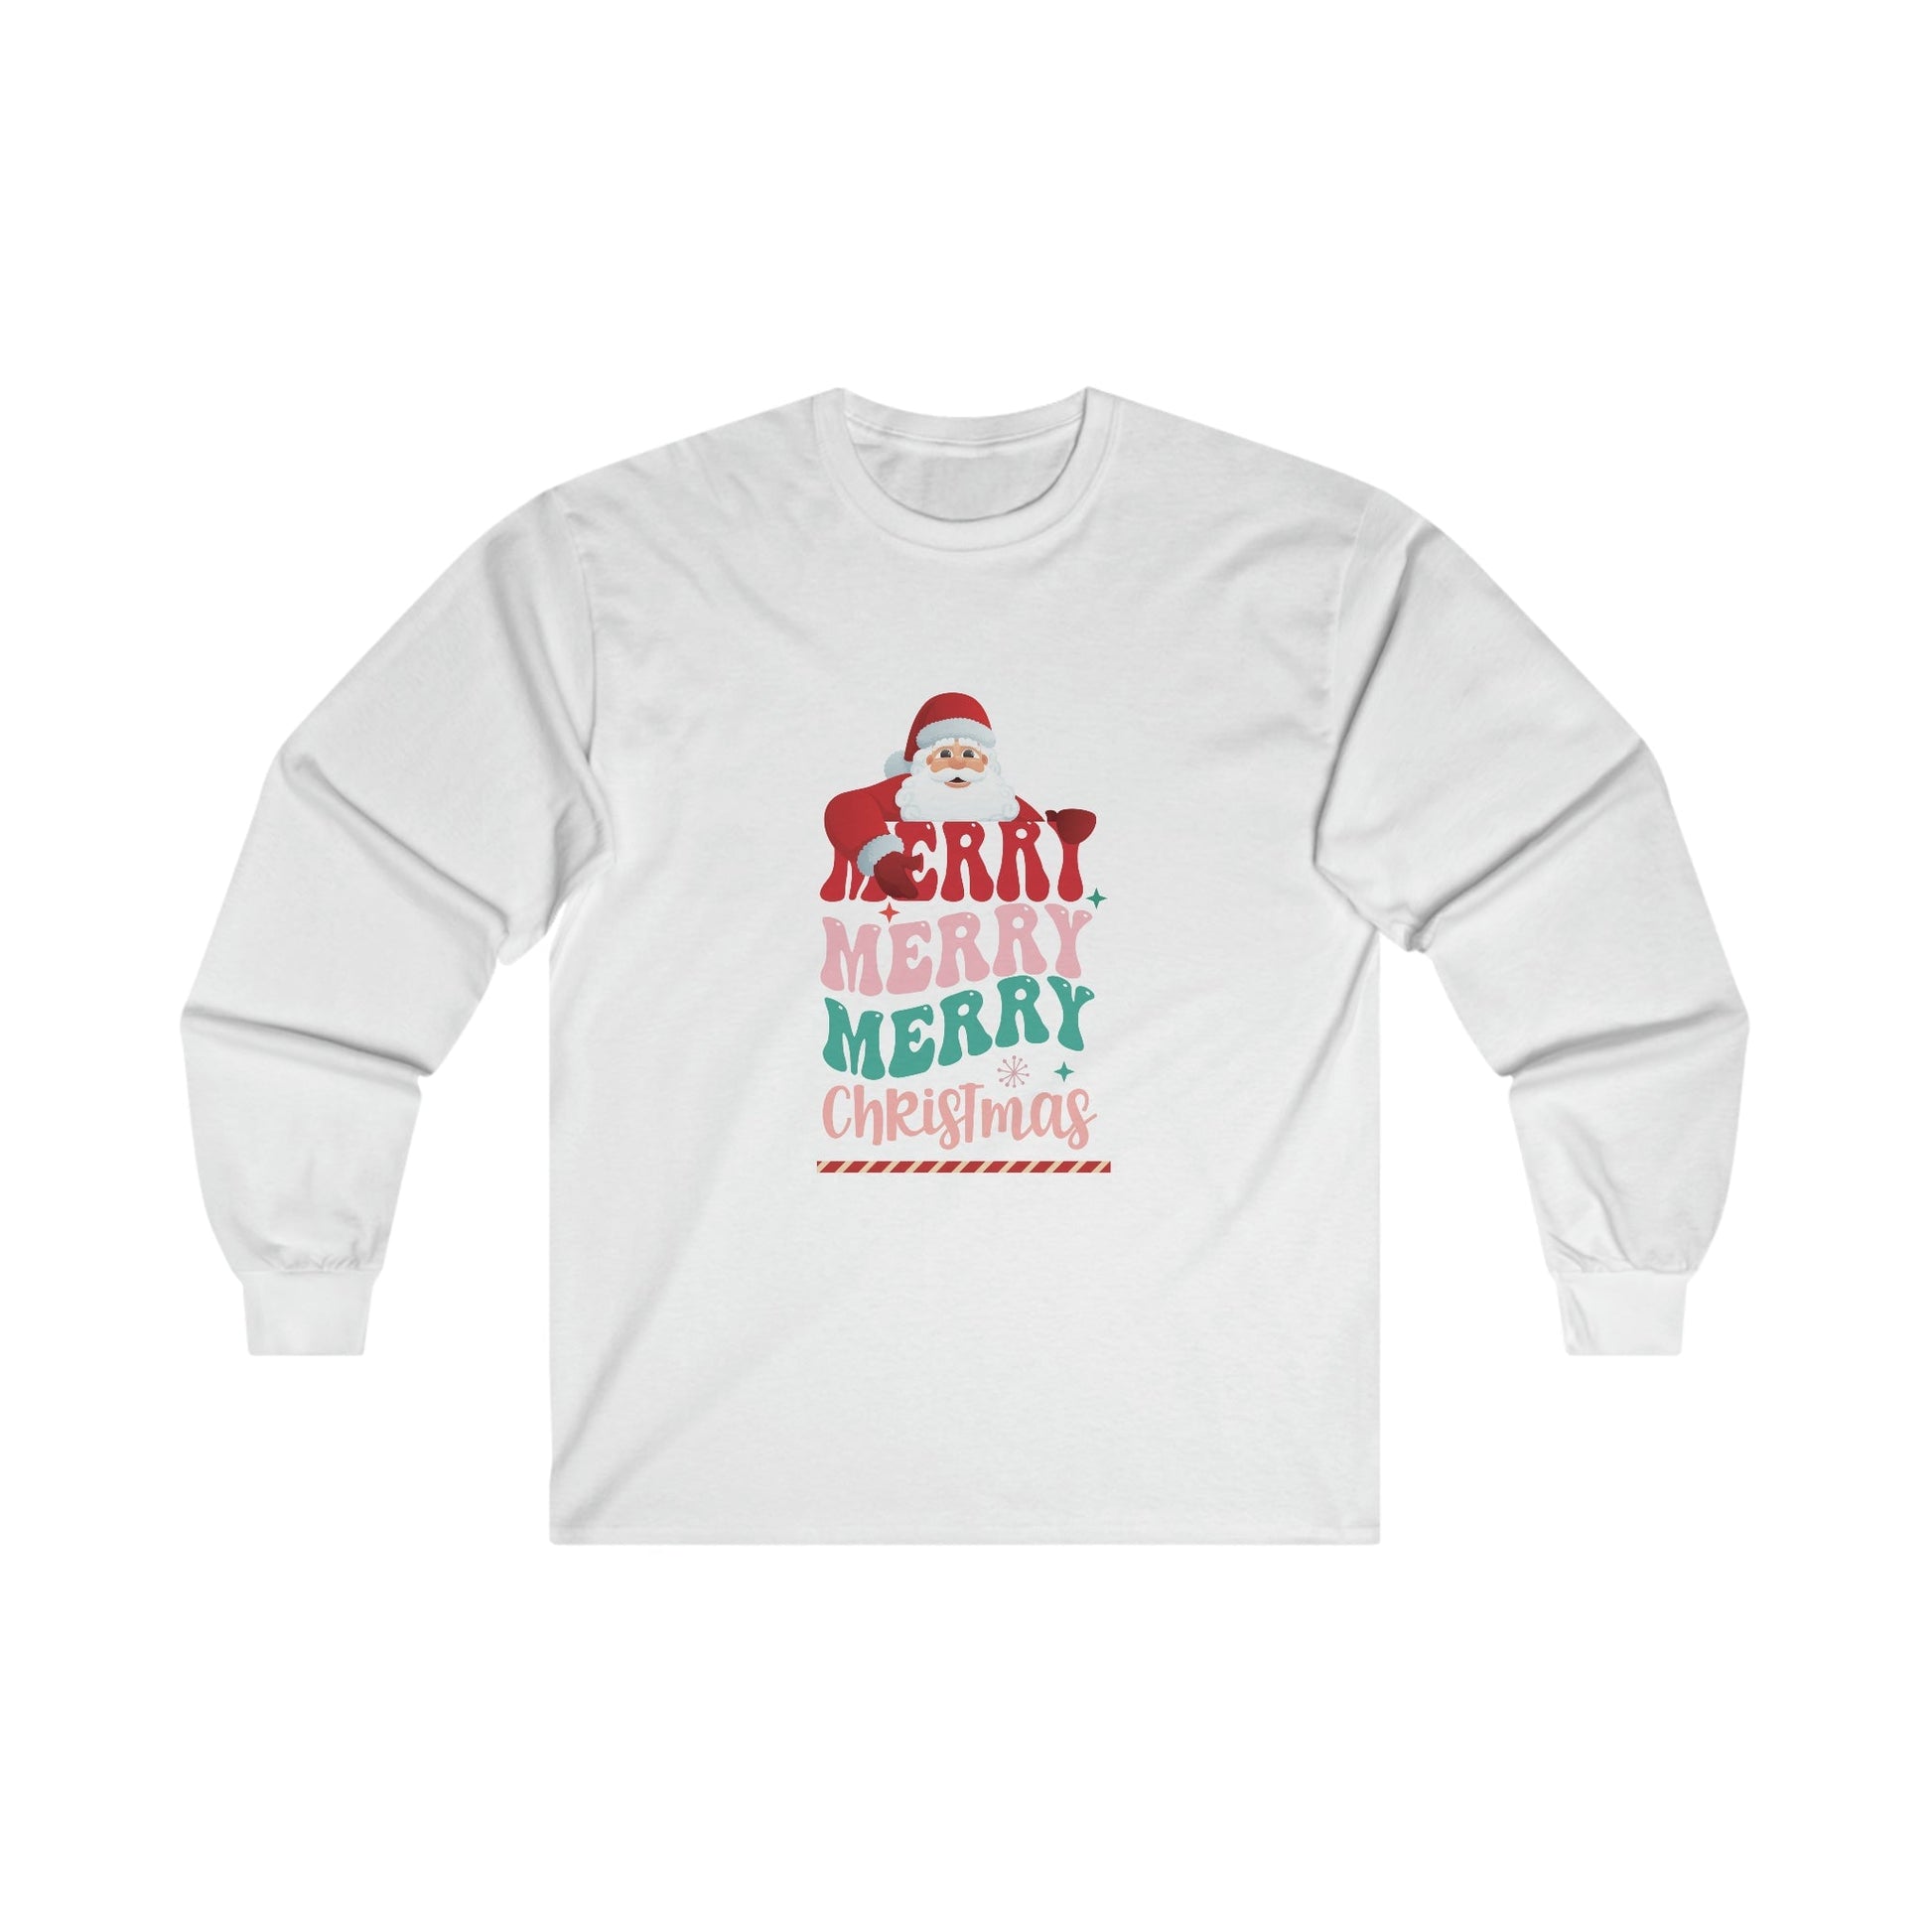 Christmas Long Sleeve T-Shirt - Merry Merry Merry Christmas - Cute Christmas Shirts - Youth and Adult Christmas Long Sleeve TShirts Long Sleeve T-Shirts Graphic Avenue White Adult Small 